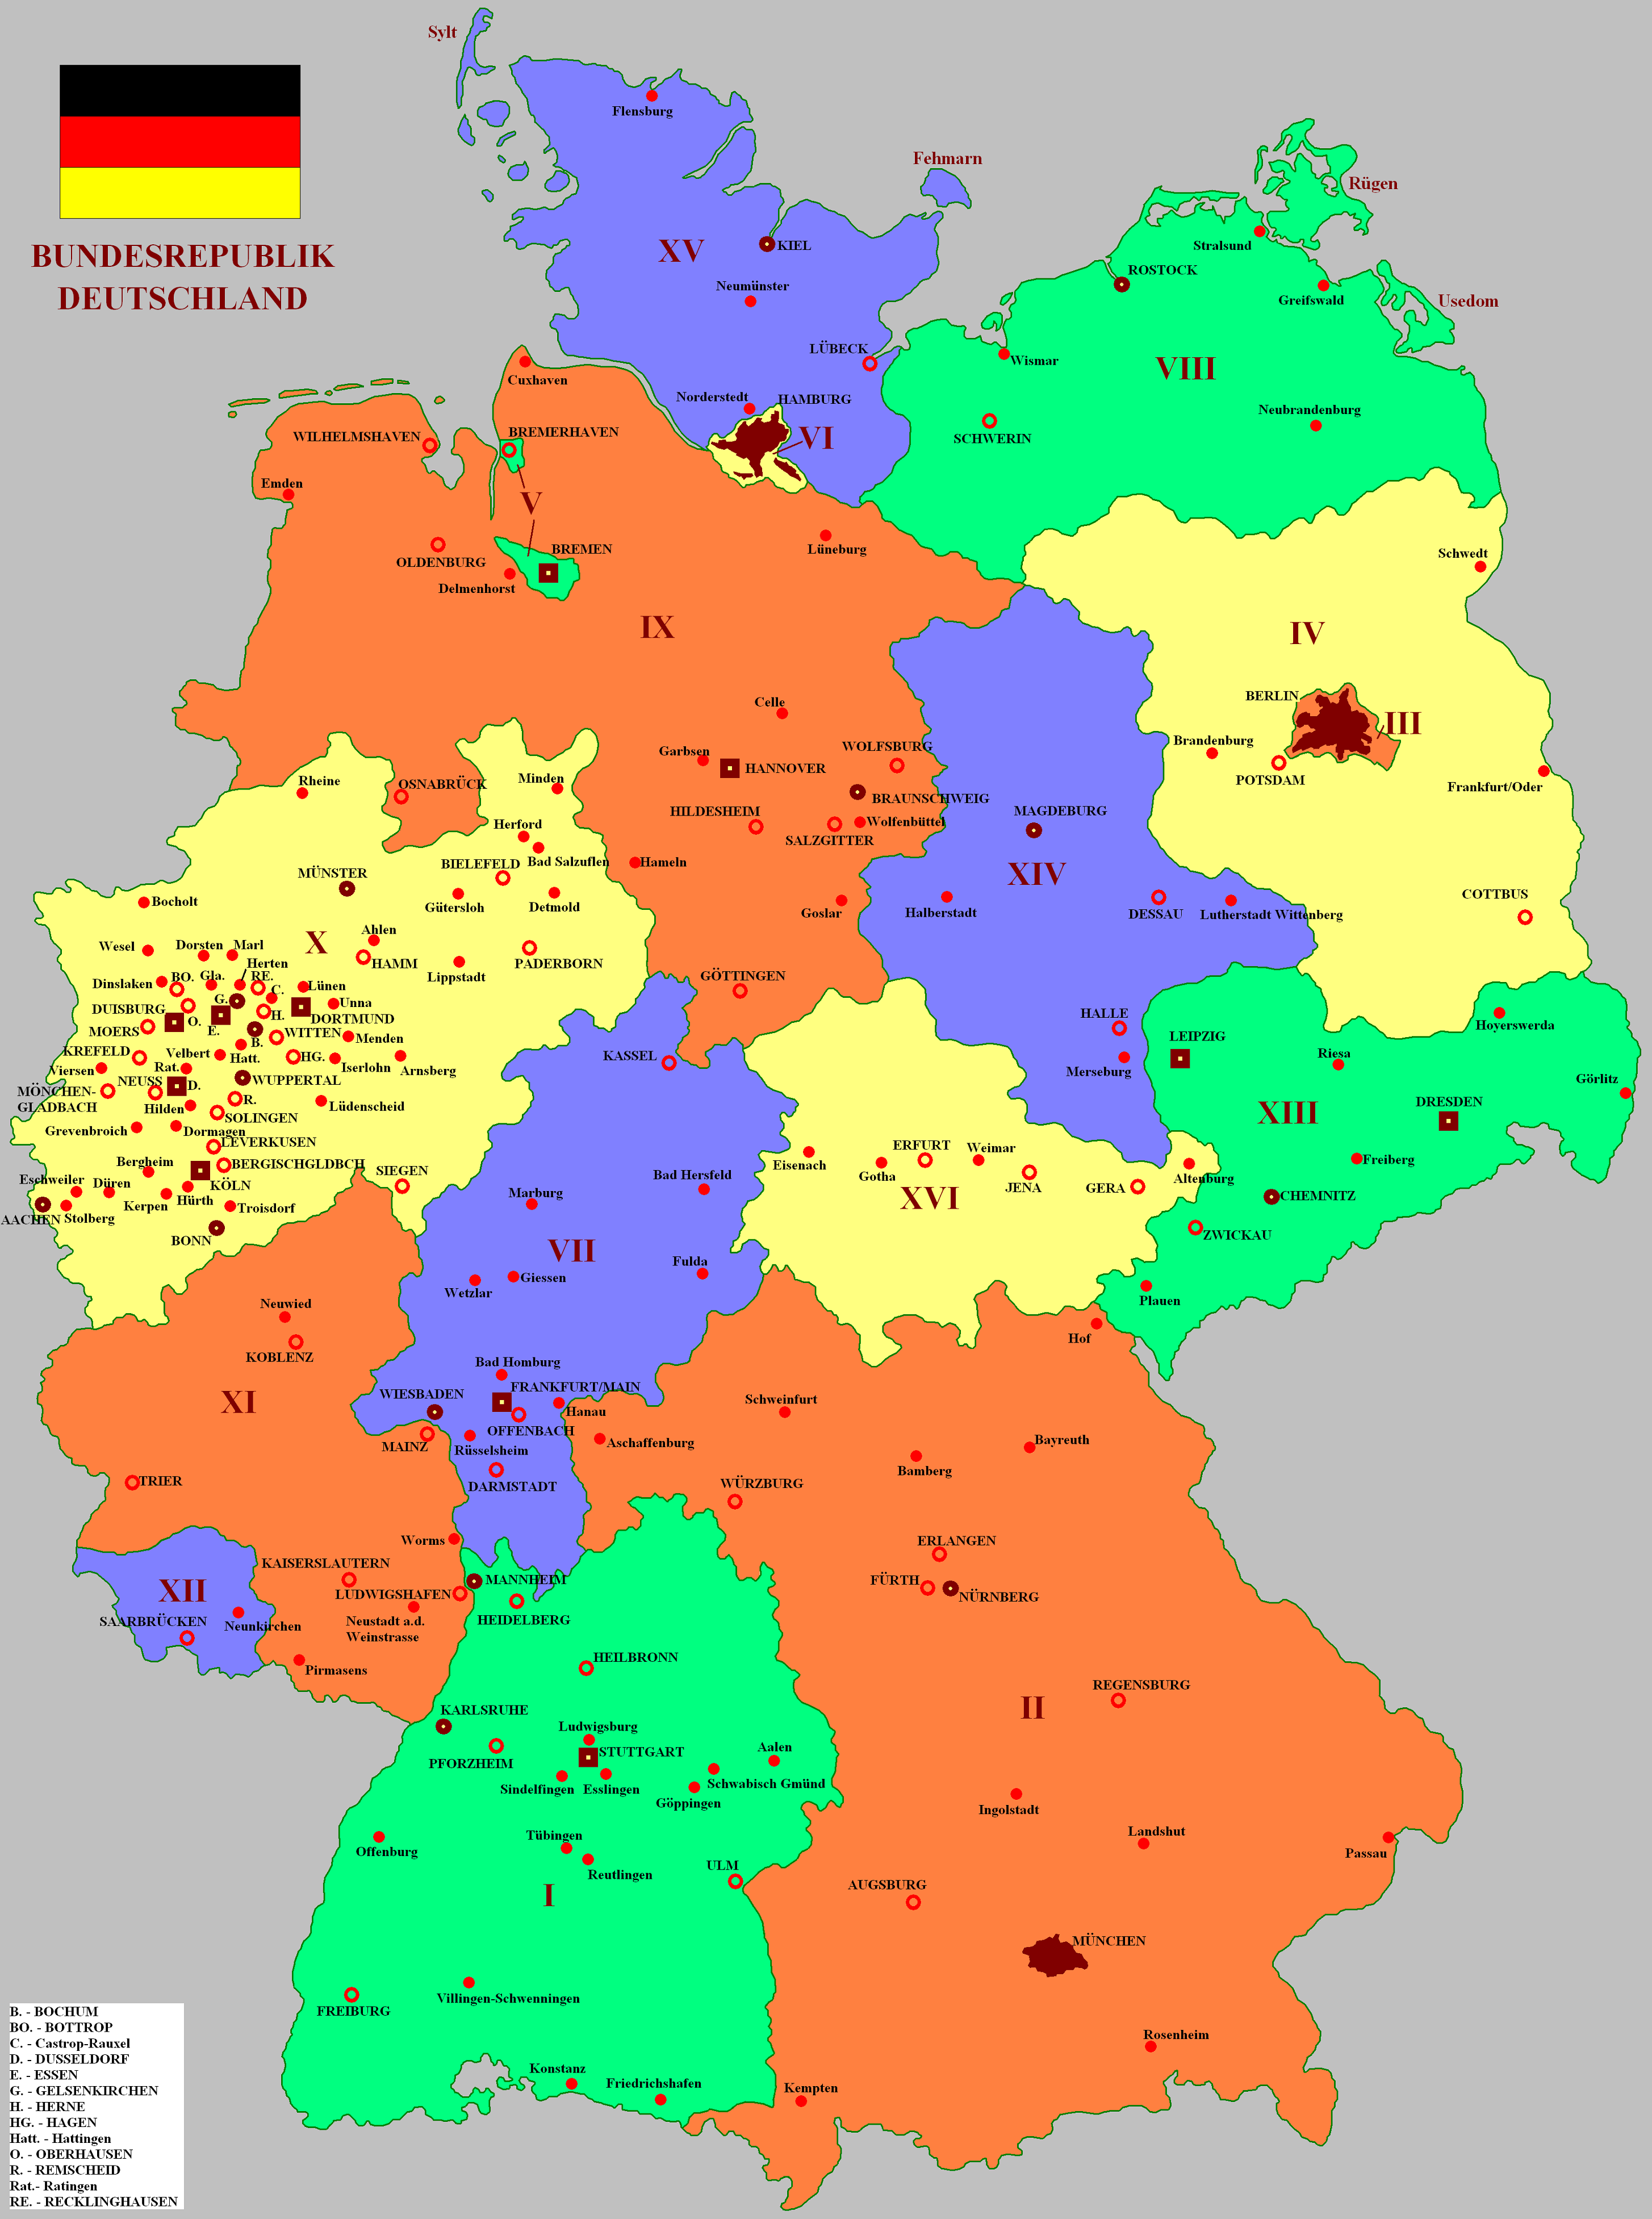 File:German cities.PNG - Wikimedia Commons